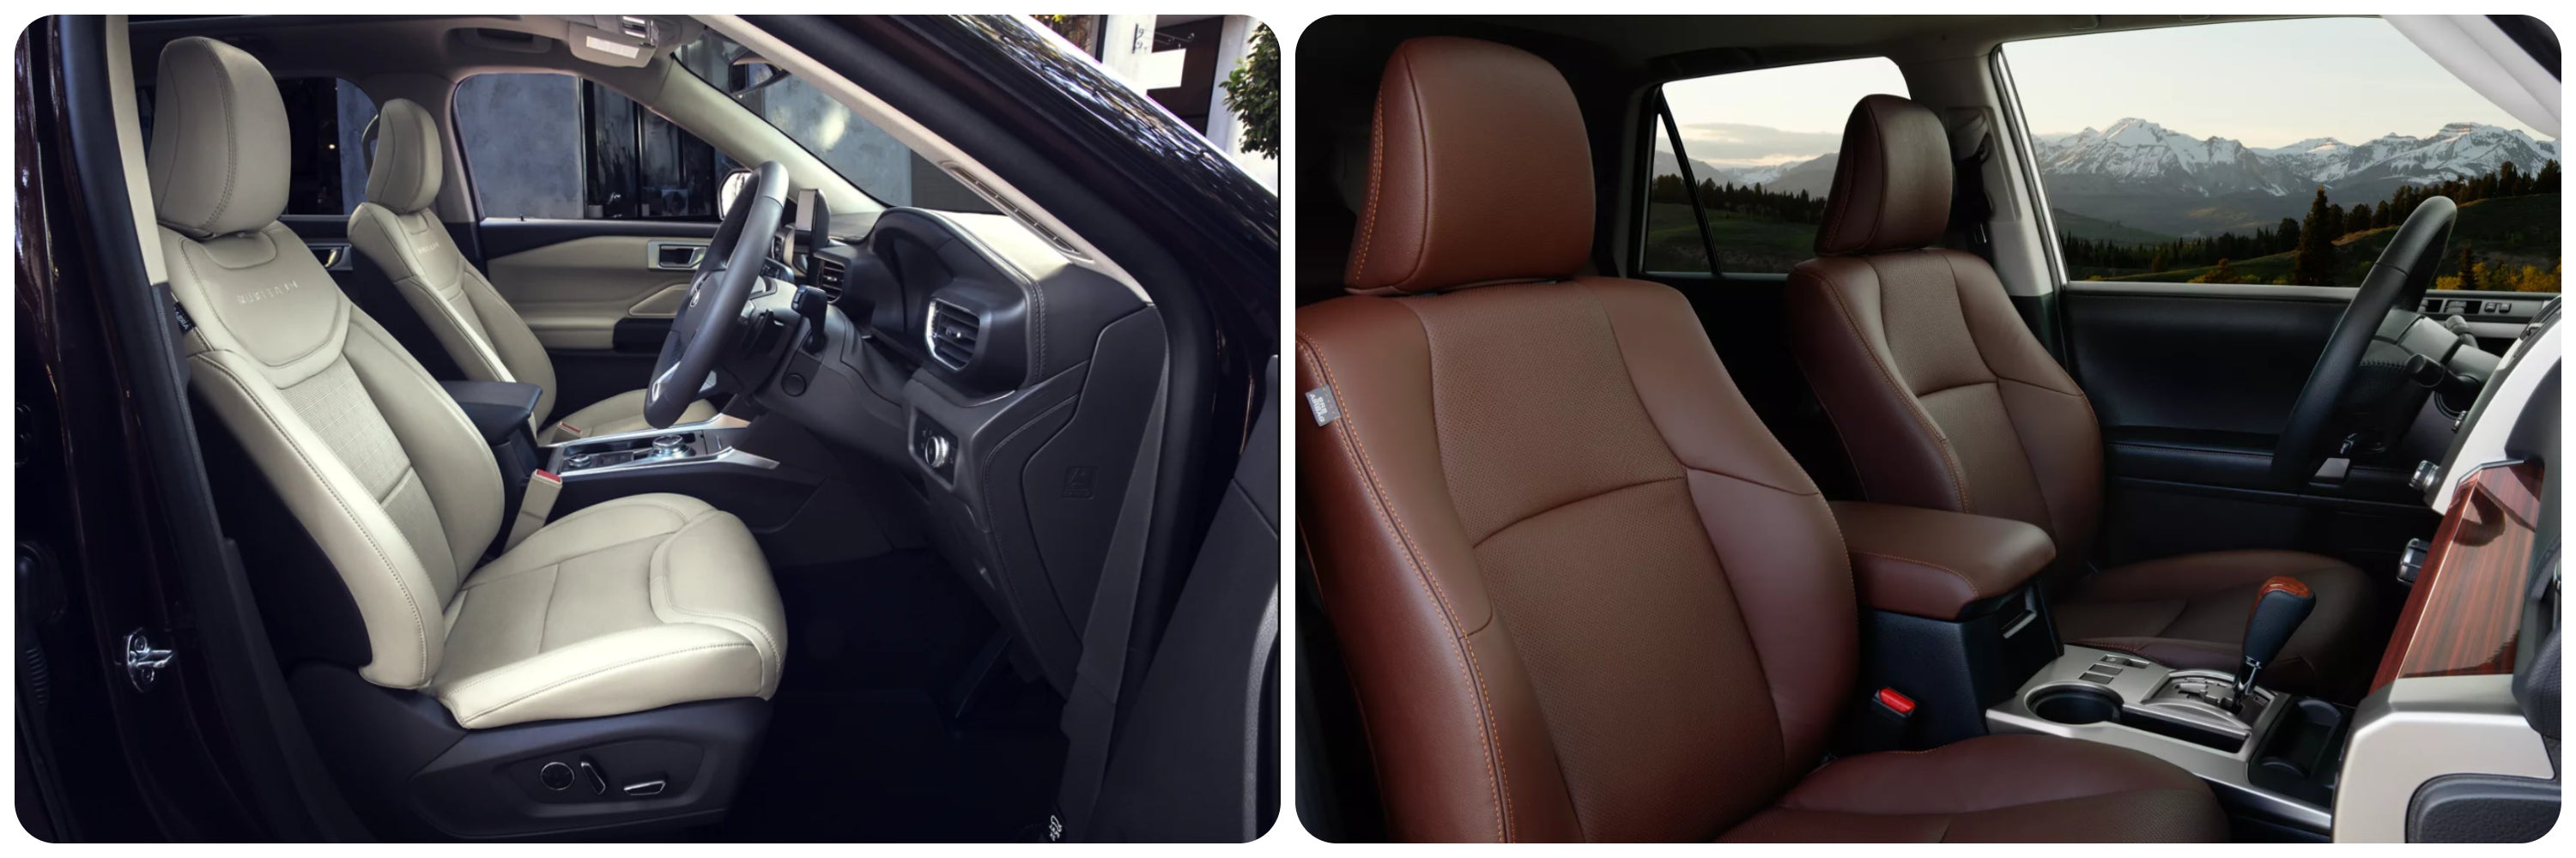 On the left a view of the interior cabin of a 2022 Ford Explorer upholstered in light gray leather. On the right a view of the cabin of a 2022 Toyota 4Runner upholstered in brown leather